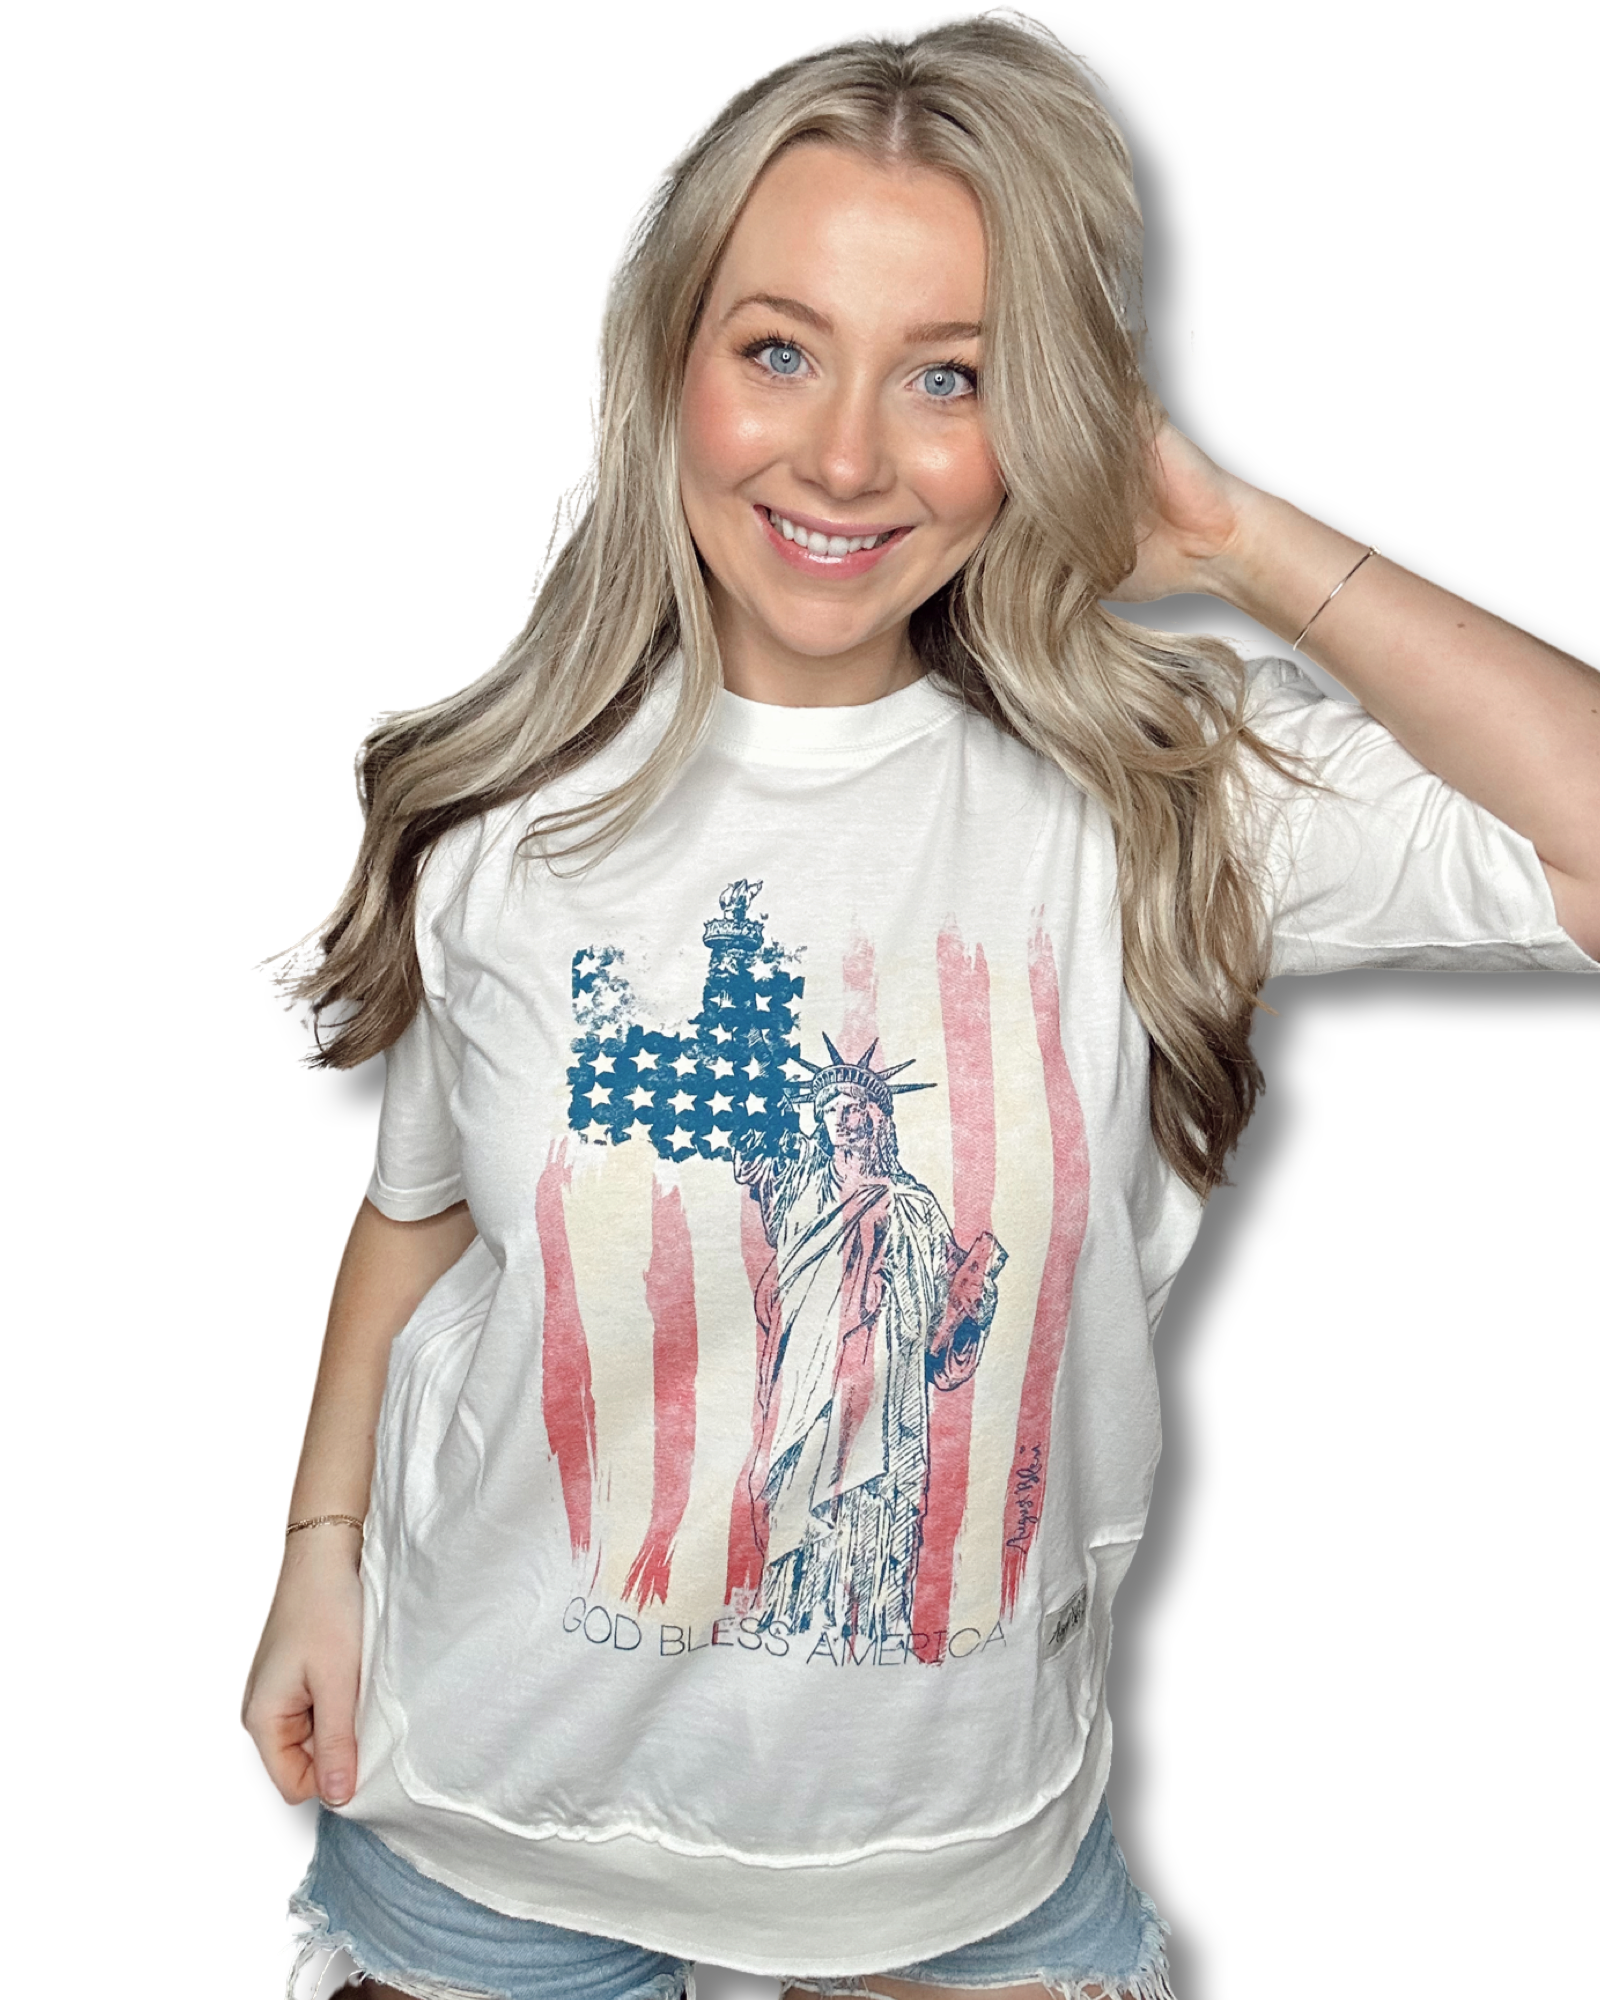 God bless America written underneath a distressed American flag and the statue of liberty on a crew neck belgian cream shirt with a high low hem 